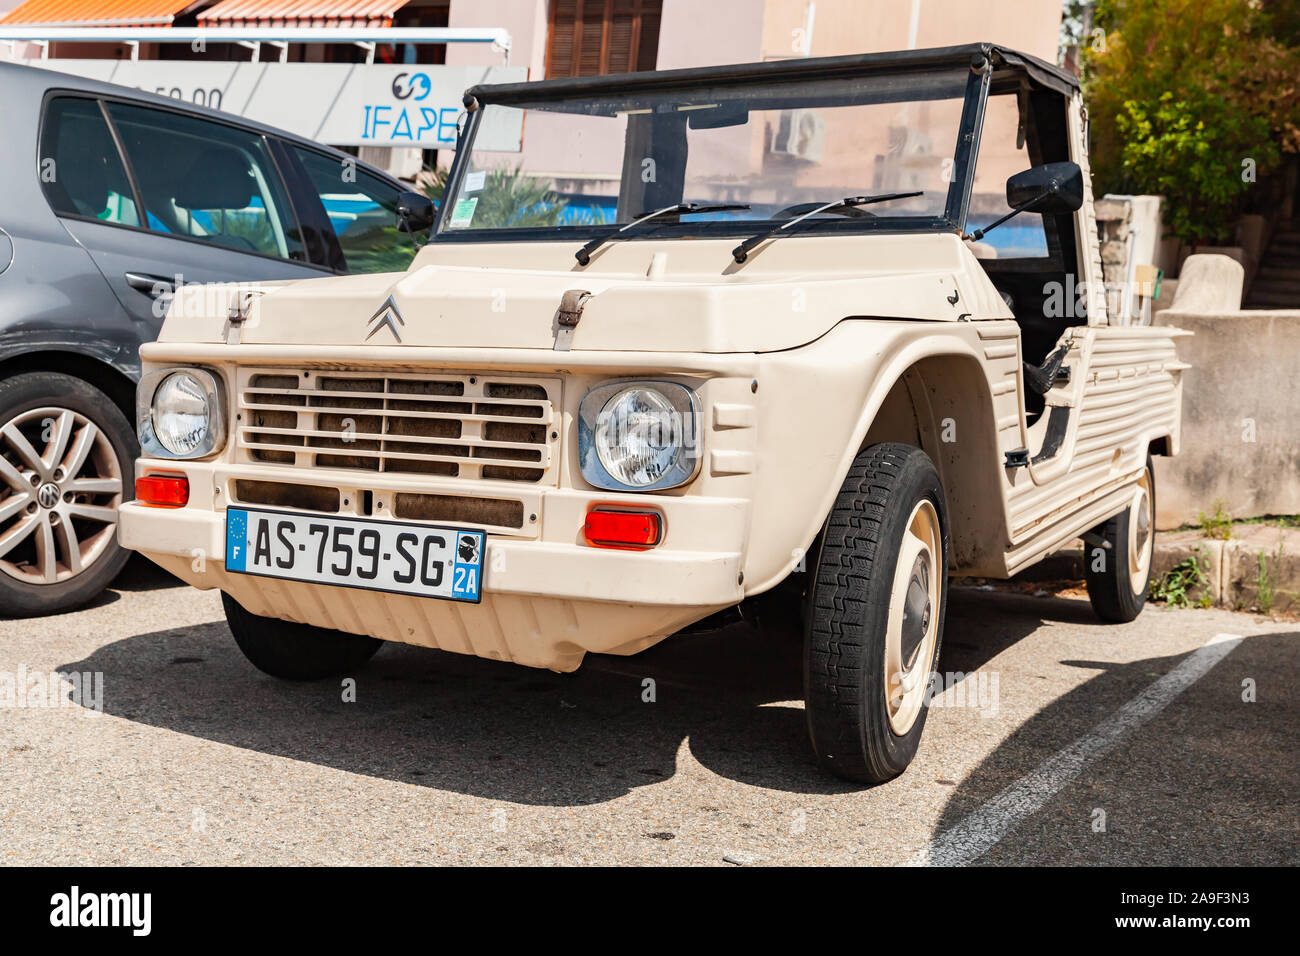 Ajaccio, France - August 25, 2018: Beige Citroen Mehari car stands parked on a street in France, close-up photo Stock Photo